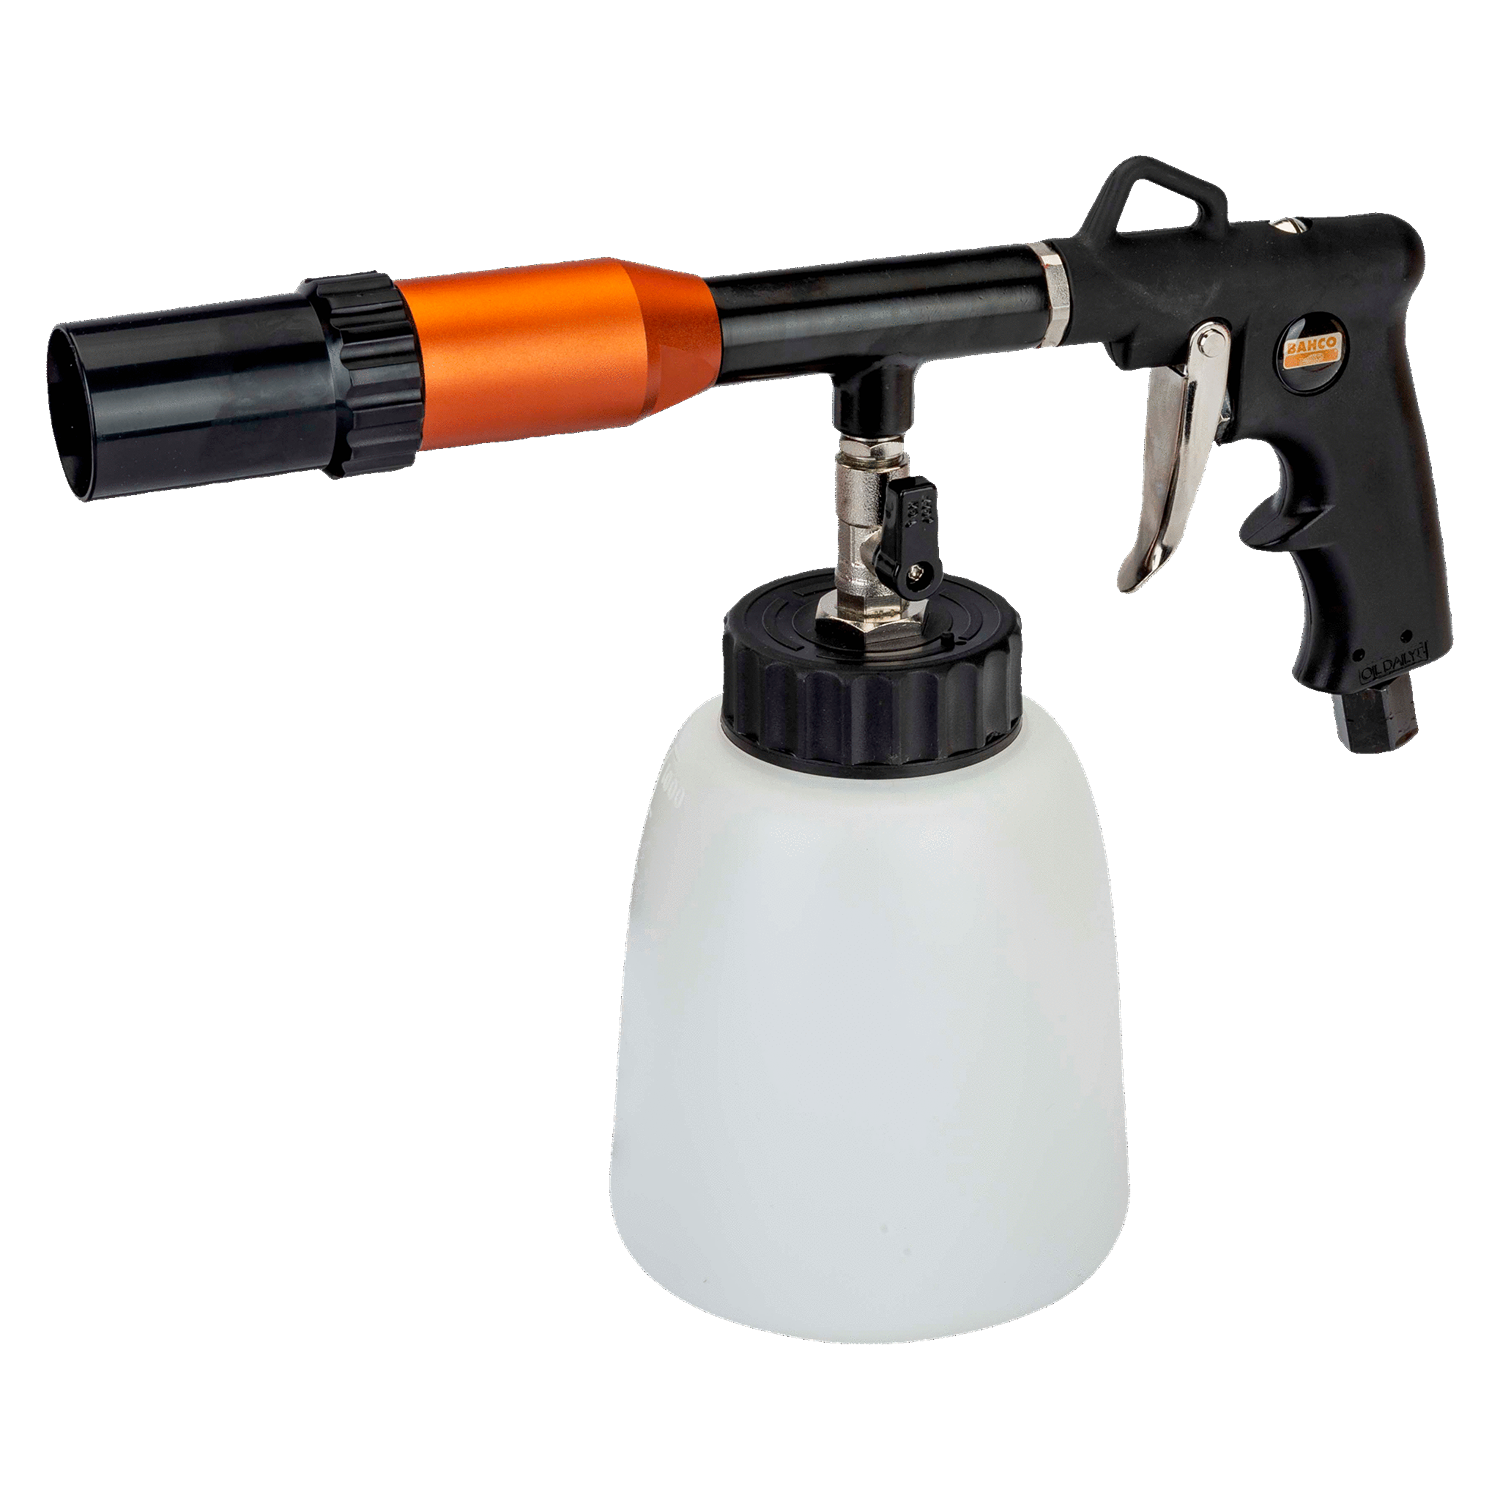 BAHCO BPN010 Cleaning Gun with Steel Nozzle (BAHCO Tools) - Premium Cleaning Gun from BAHCO - Shop now at Yew Aik.